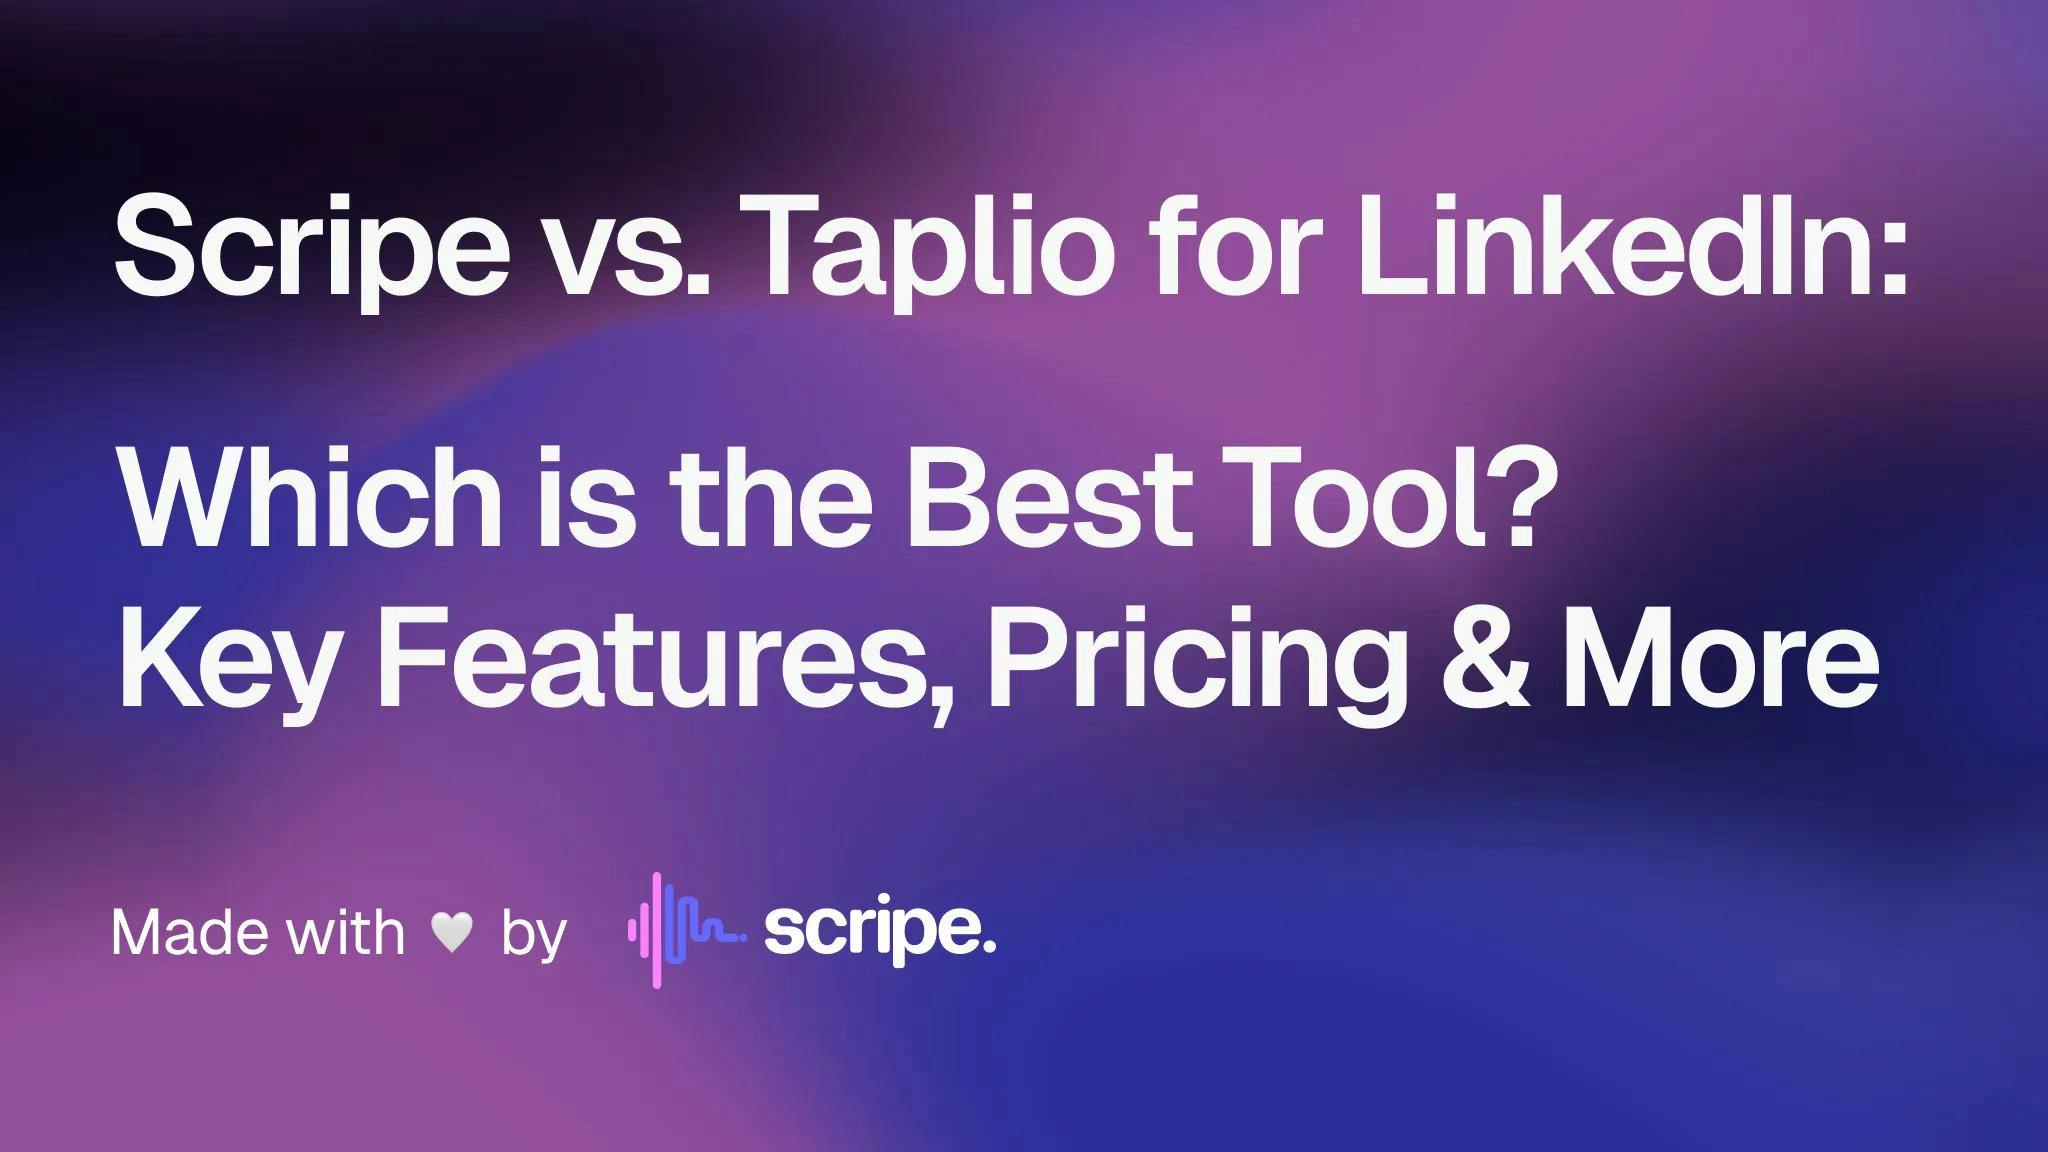 Scripe vs. Taplio for LinkedIn: Which is the Best Tool? Key Features, Pricing, and More